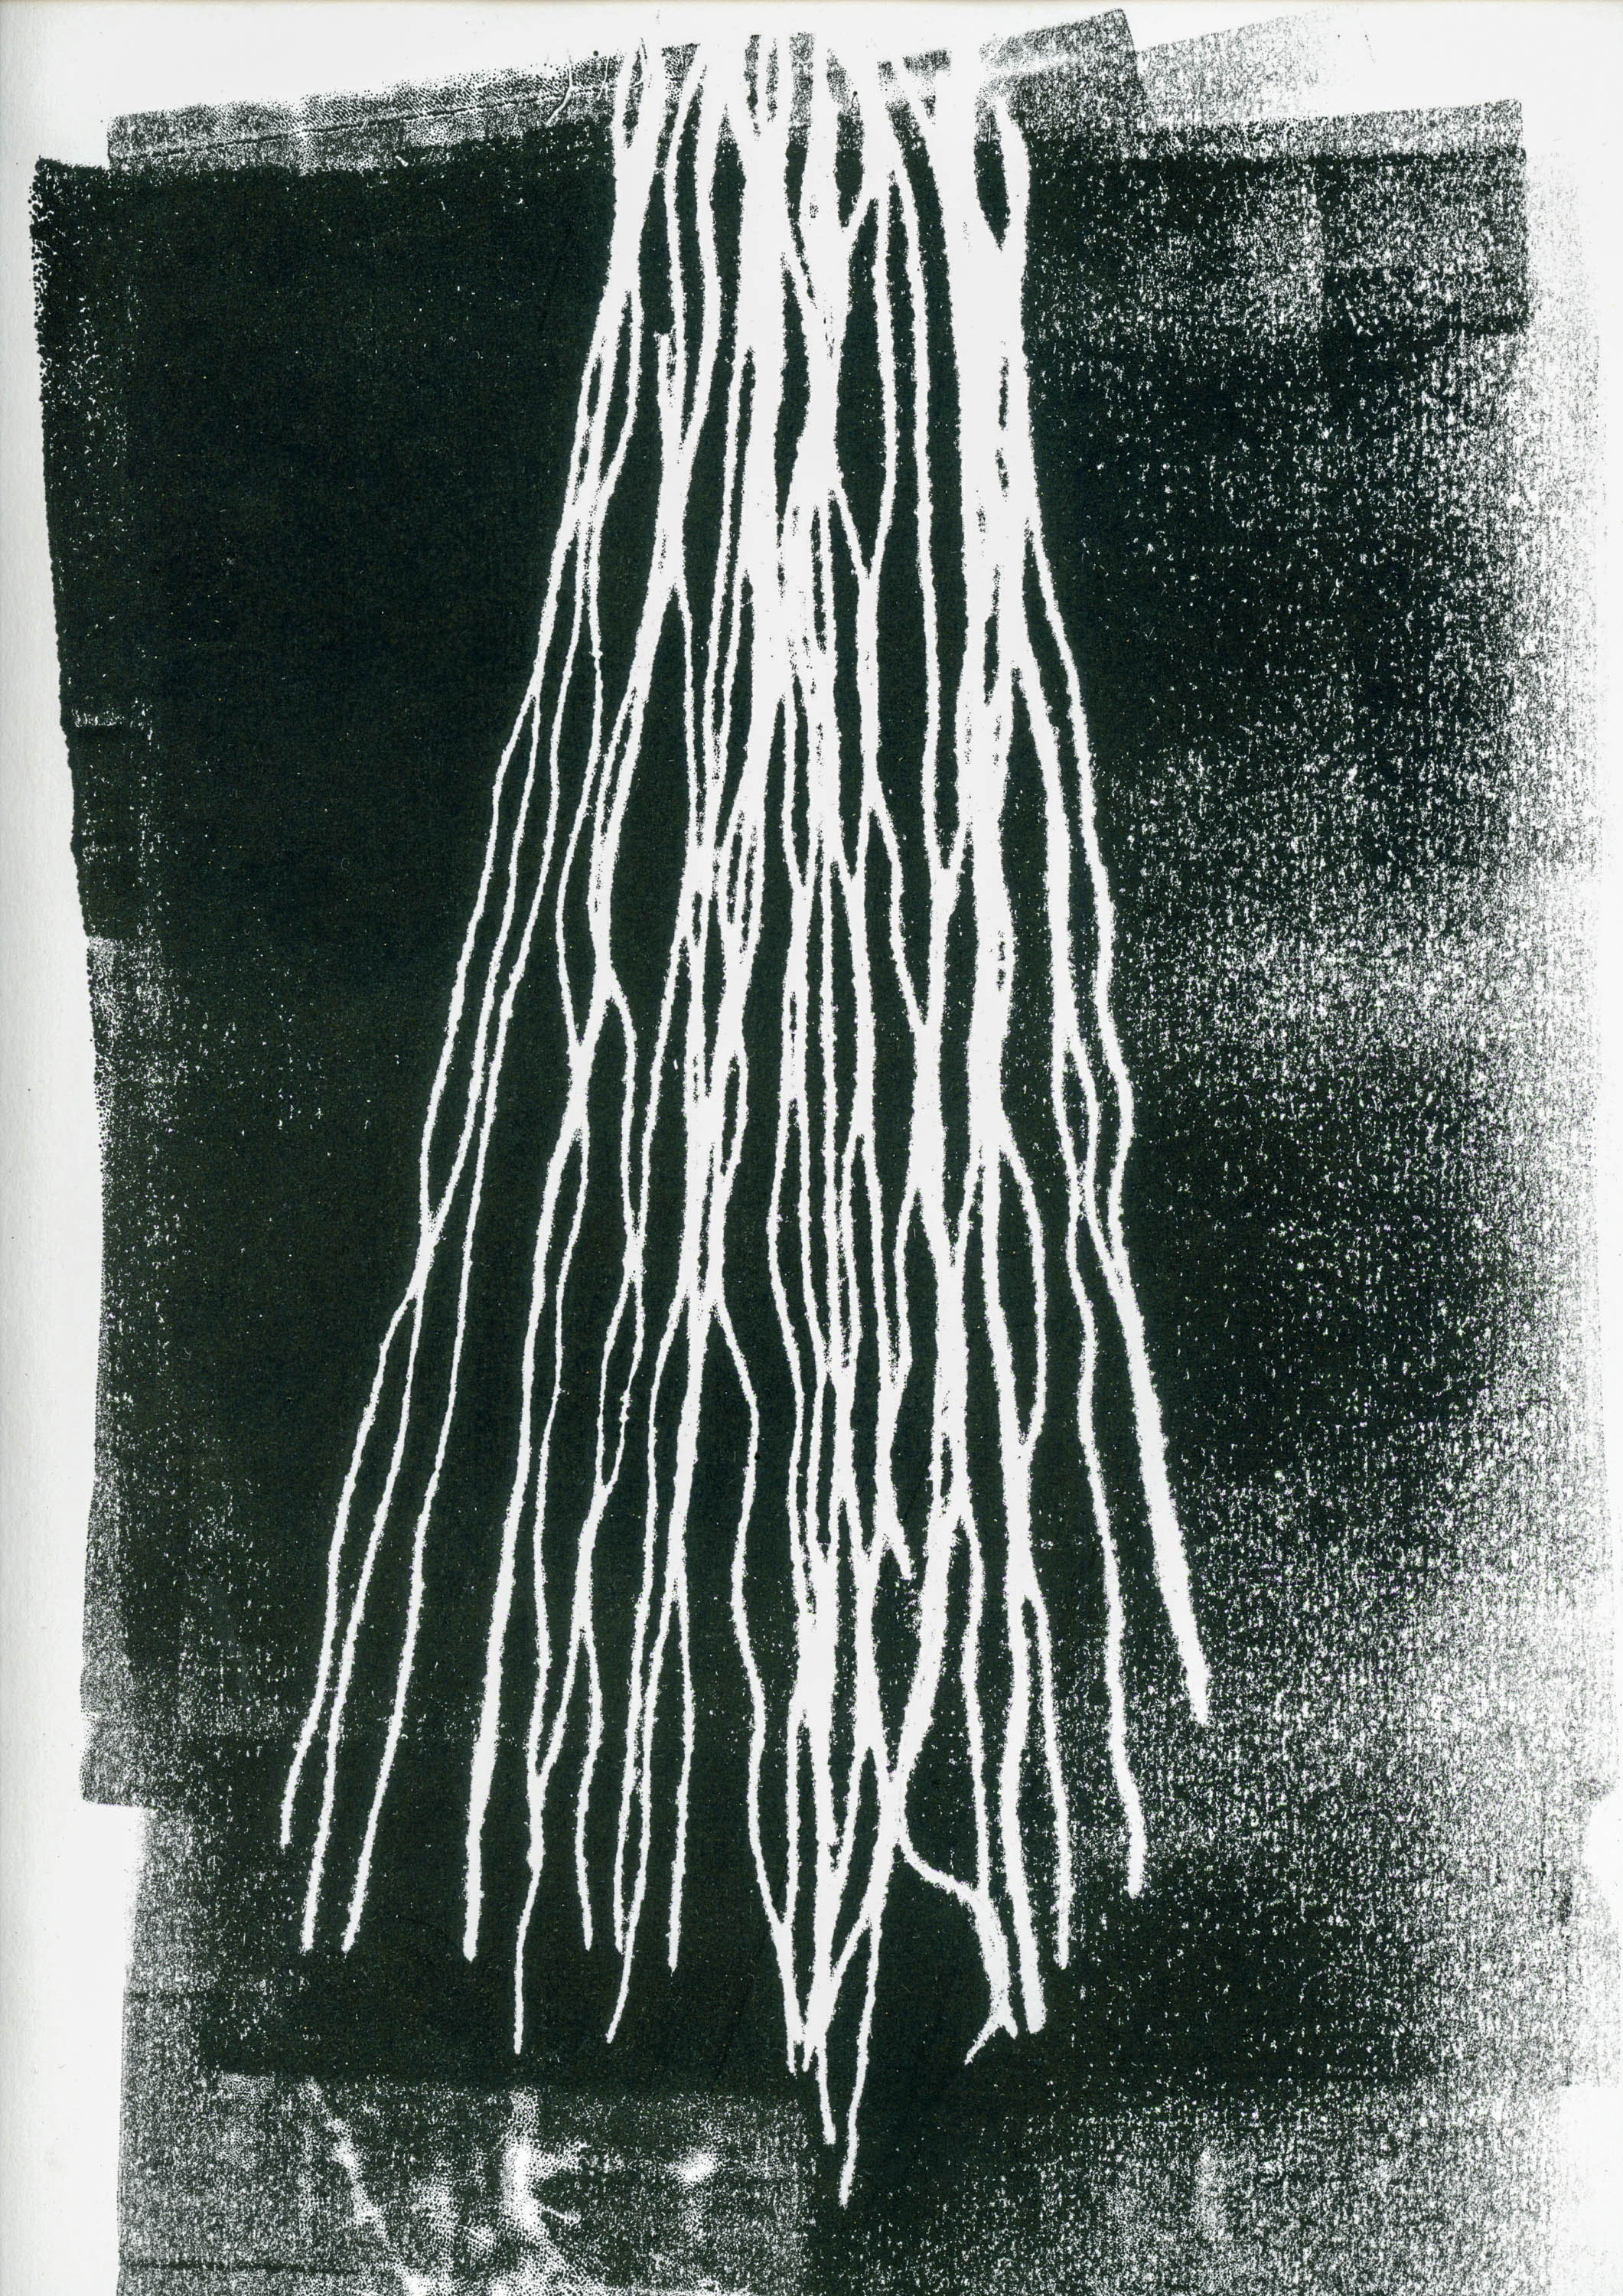 A monoprint in black ink with flowing lines in white travelling down the page